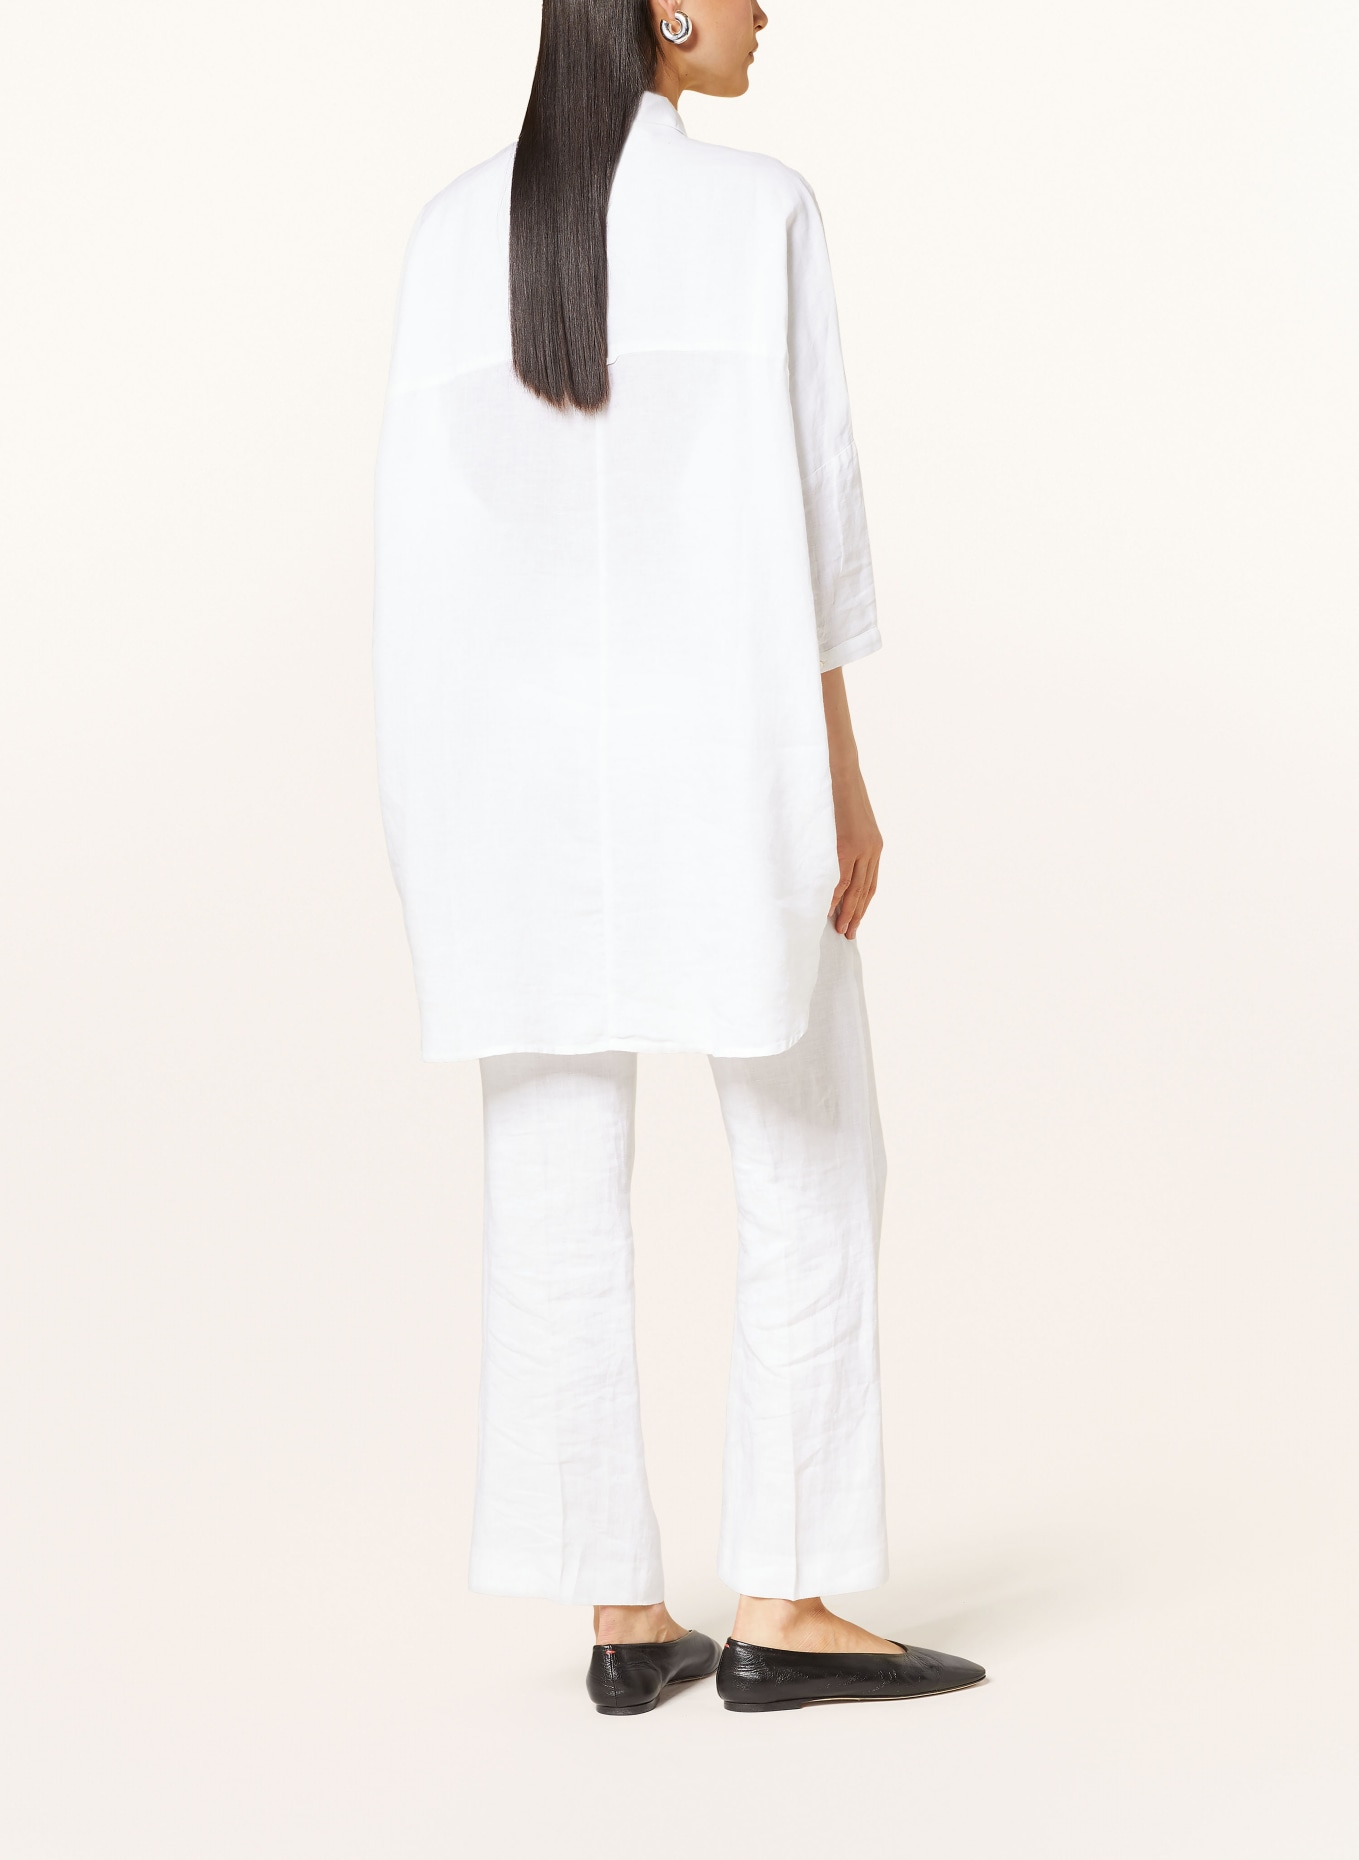 Princess GOES HOLLYWOOD Oversized shirt blouse made of linen, Color: WHITE (Image 3)